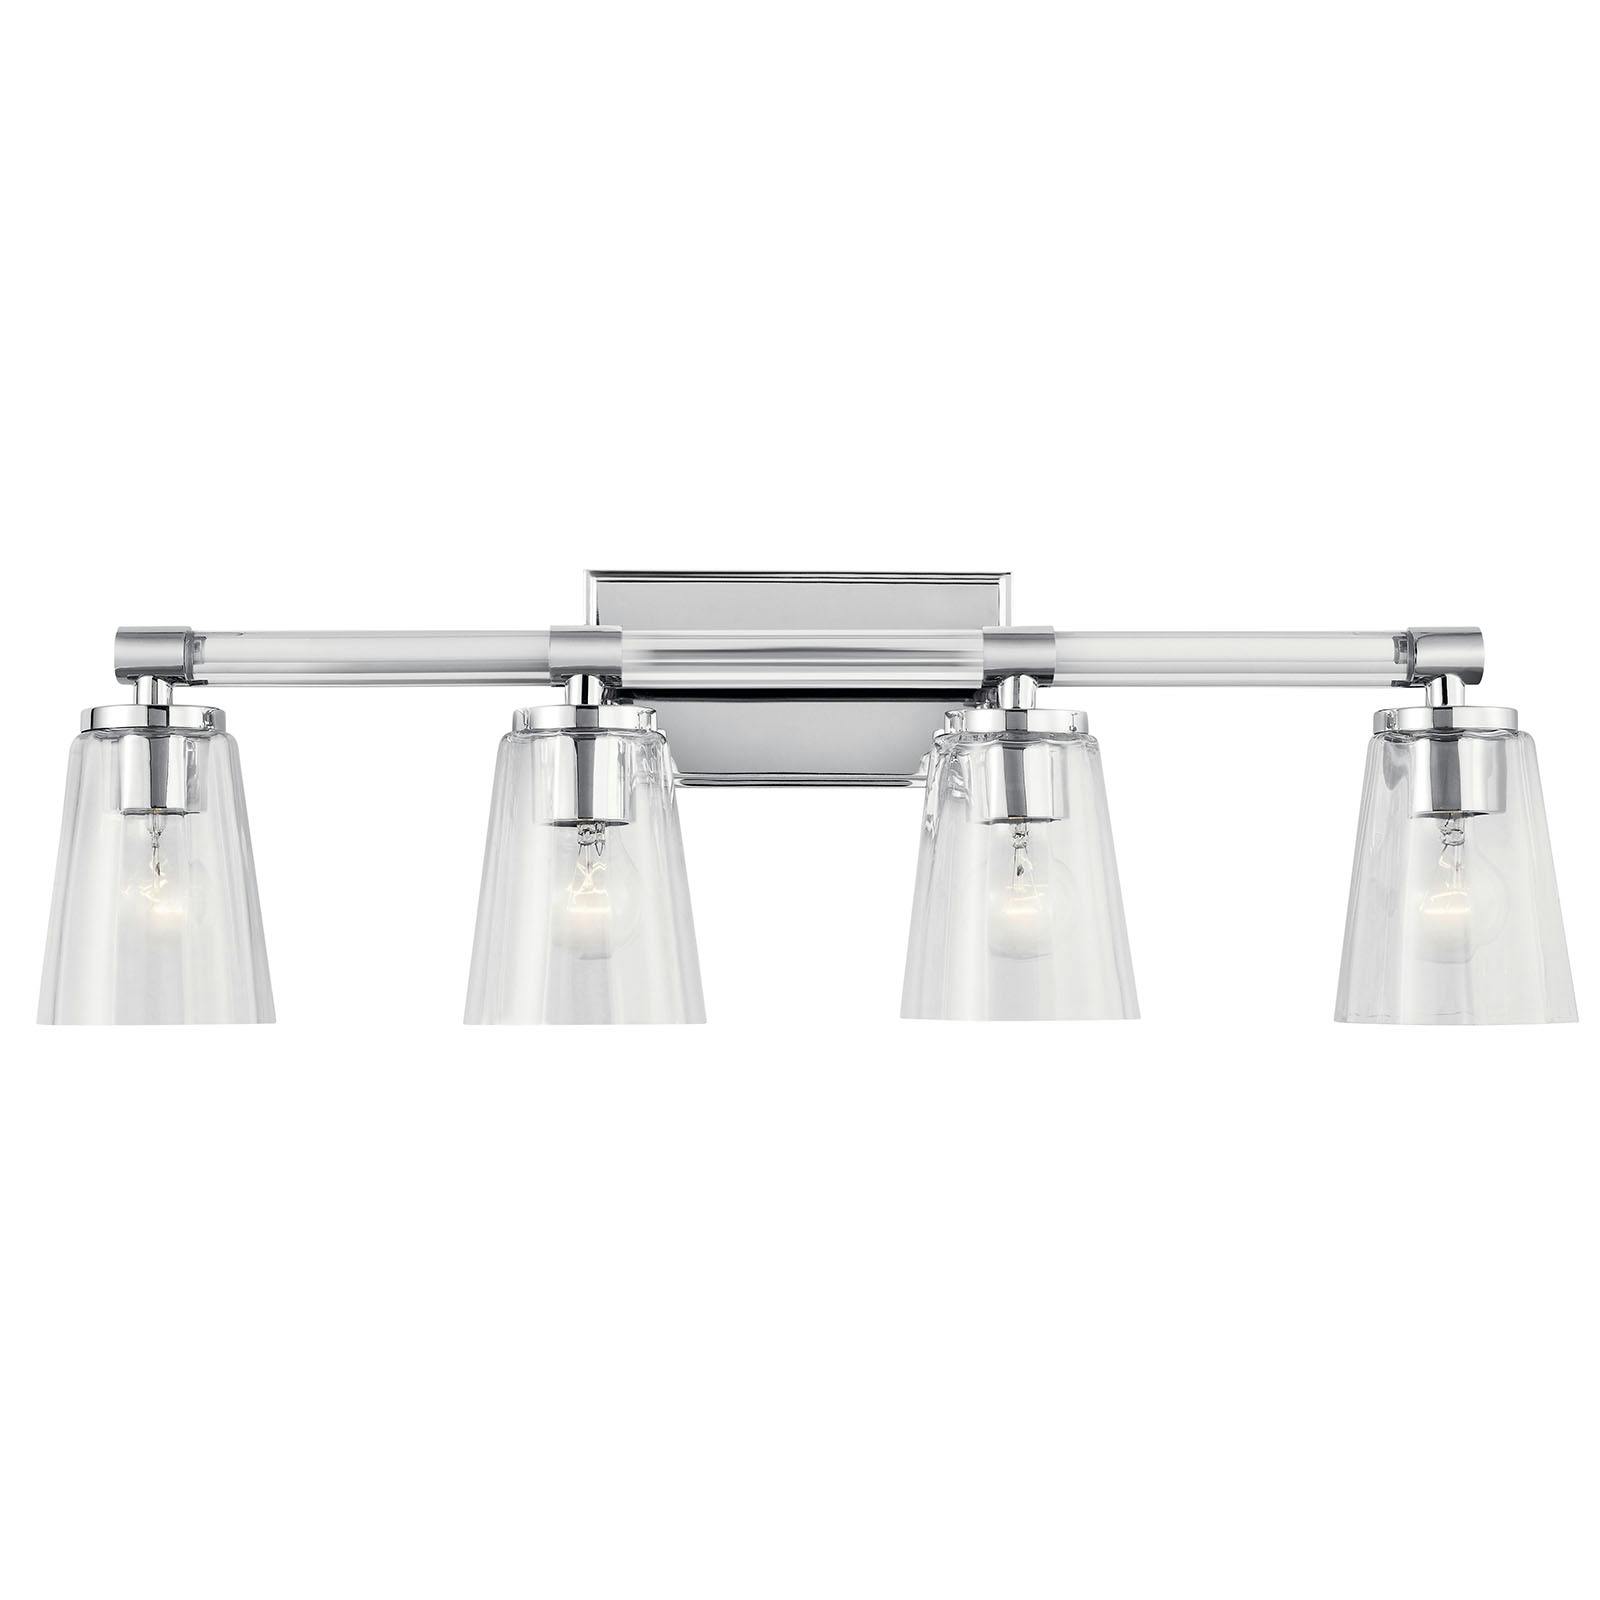 The Audrea™ 4 Light Vanity Light Chrome facing down on a white background